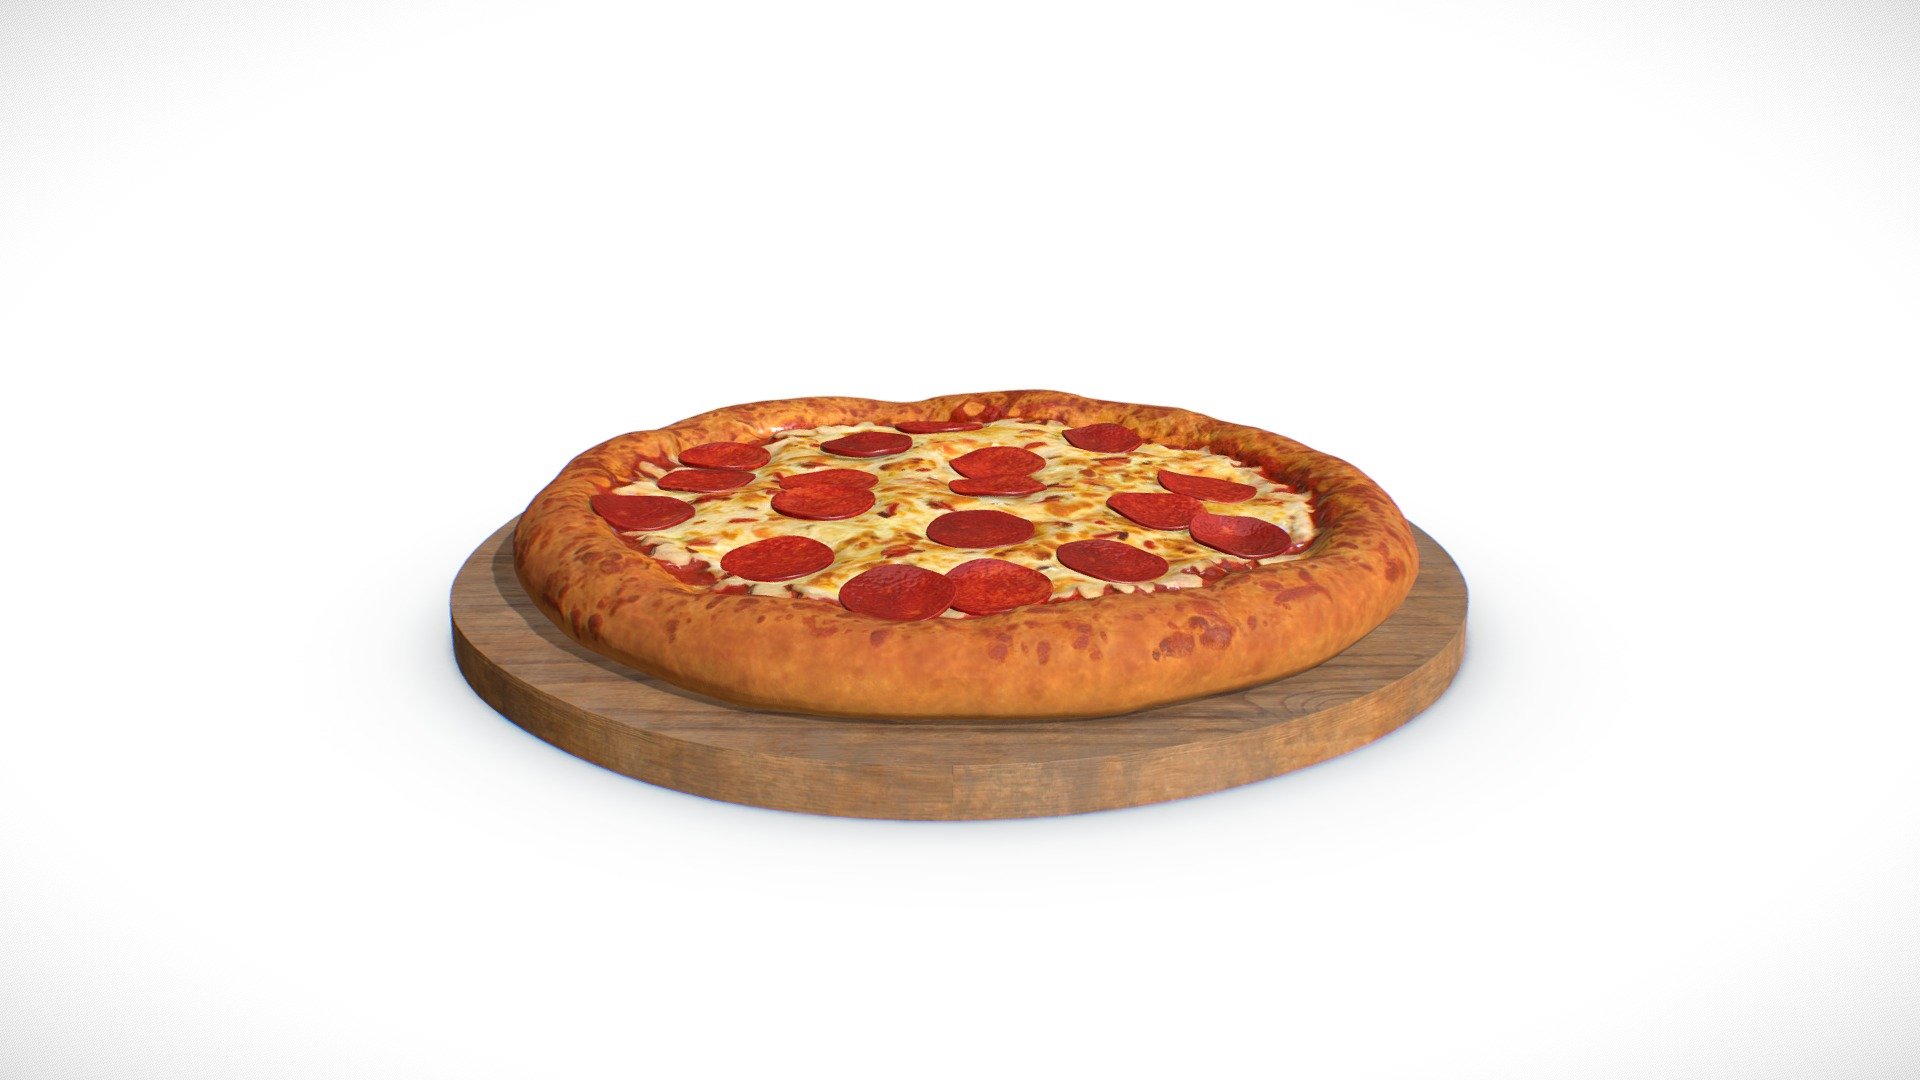 Pepperoni pizza on wooden cutting board.  Great for kitchen or restaurant interior scenes. 

All quad geometry 3d model